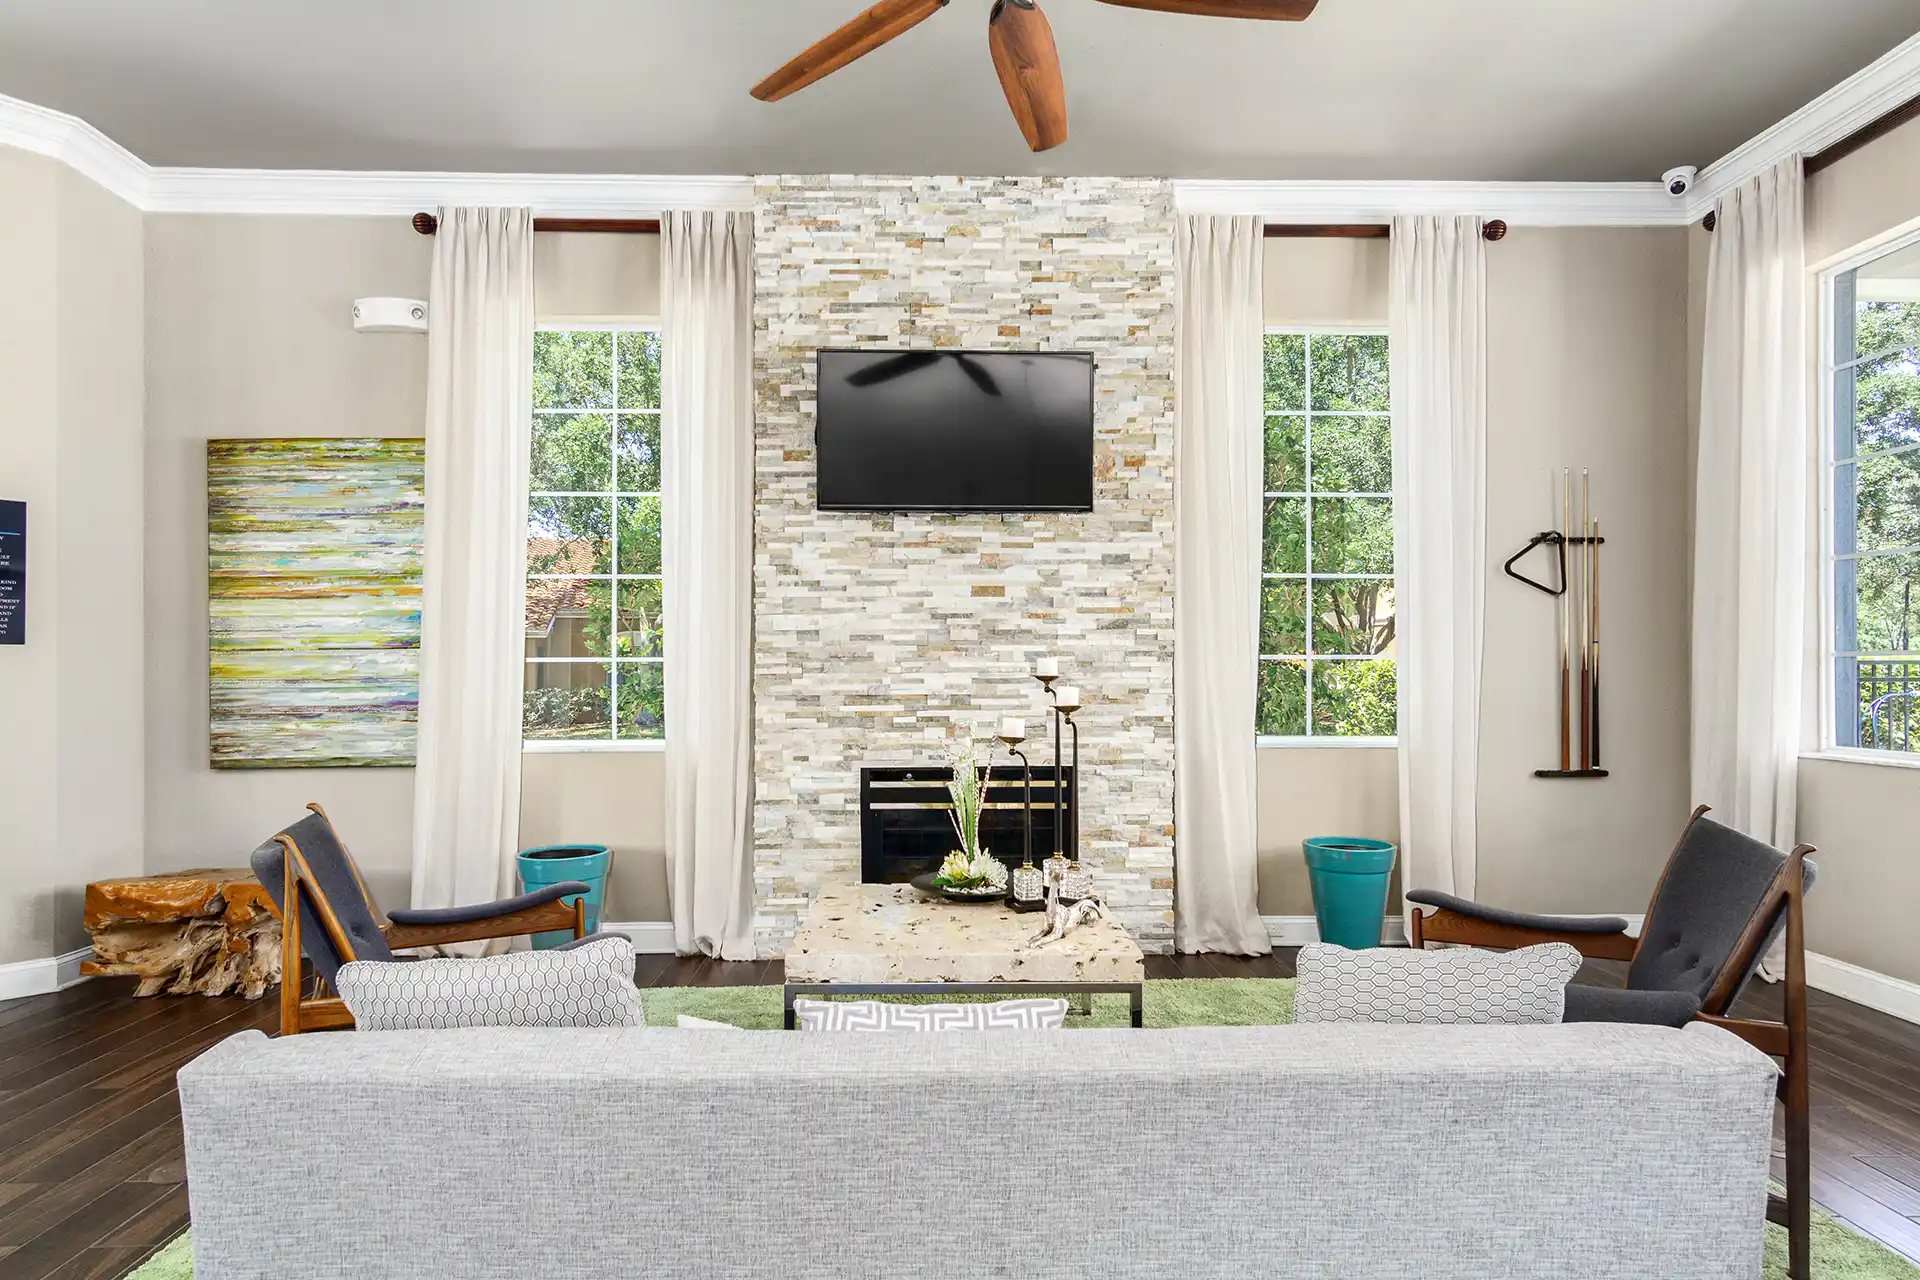 community room with wall art, wall-mounted TV, ceiling fan and windows